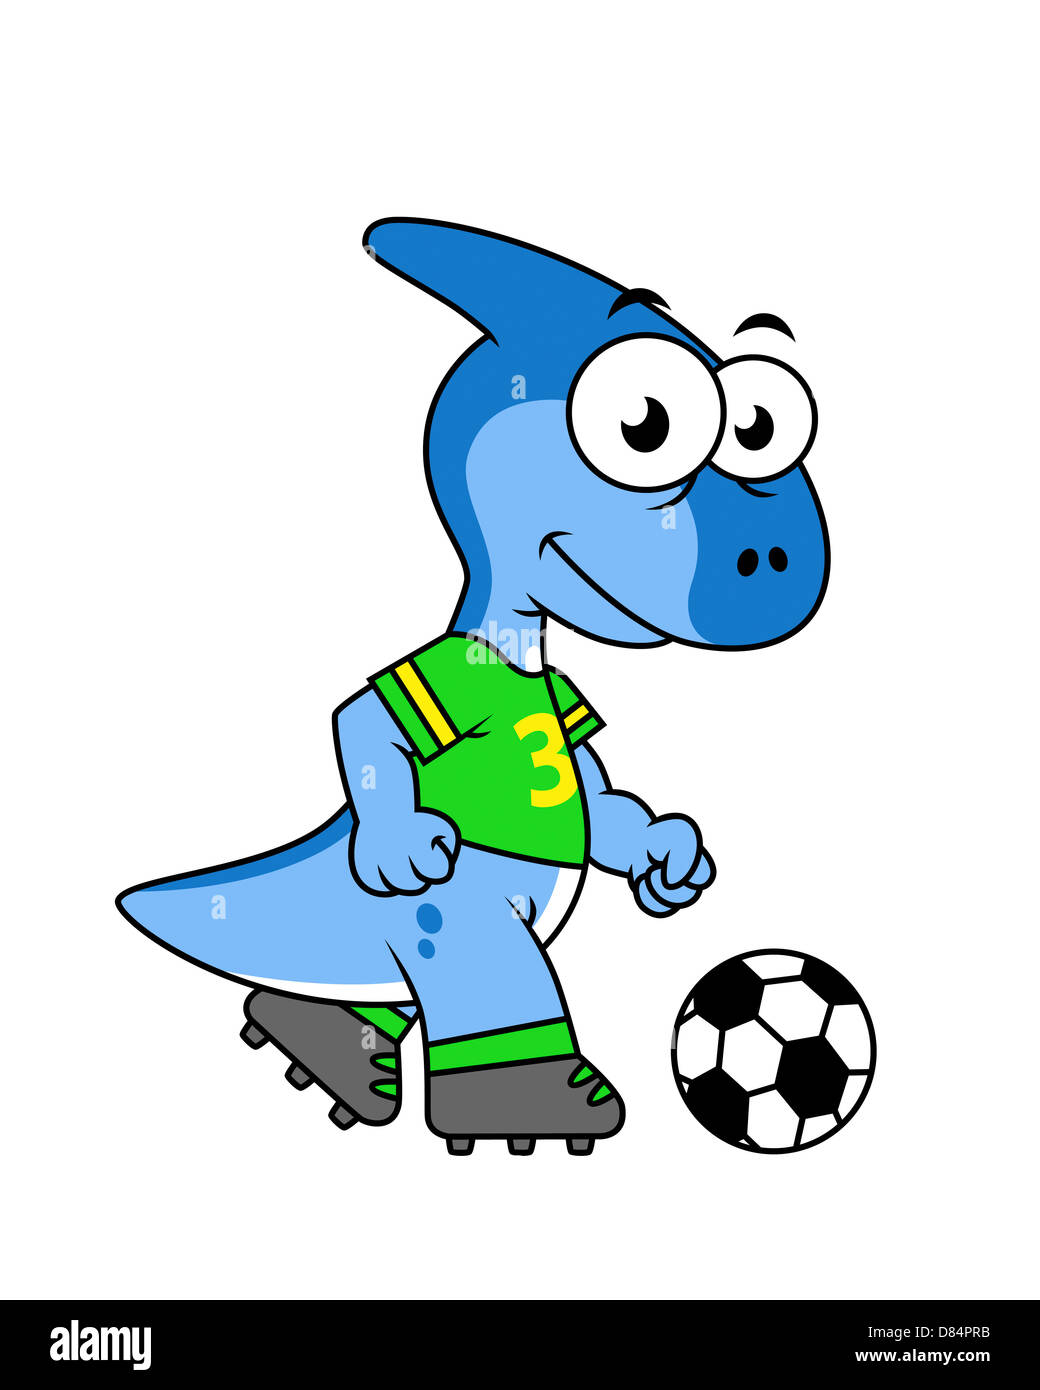 Cute illustration of a Parasaurolophus playing soccer. Stock Photo